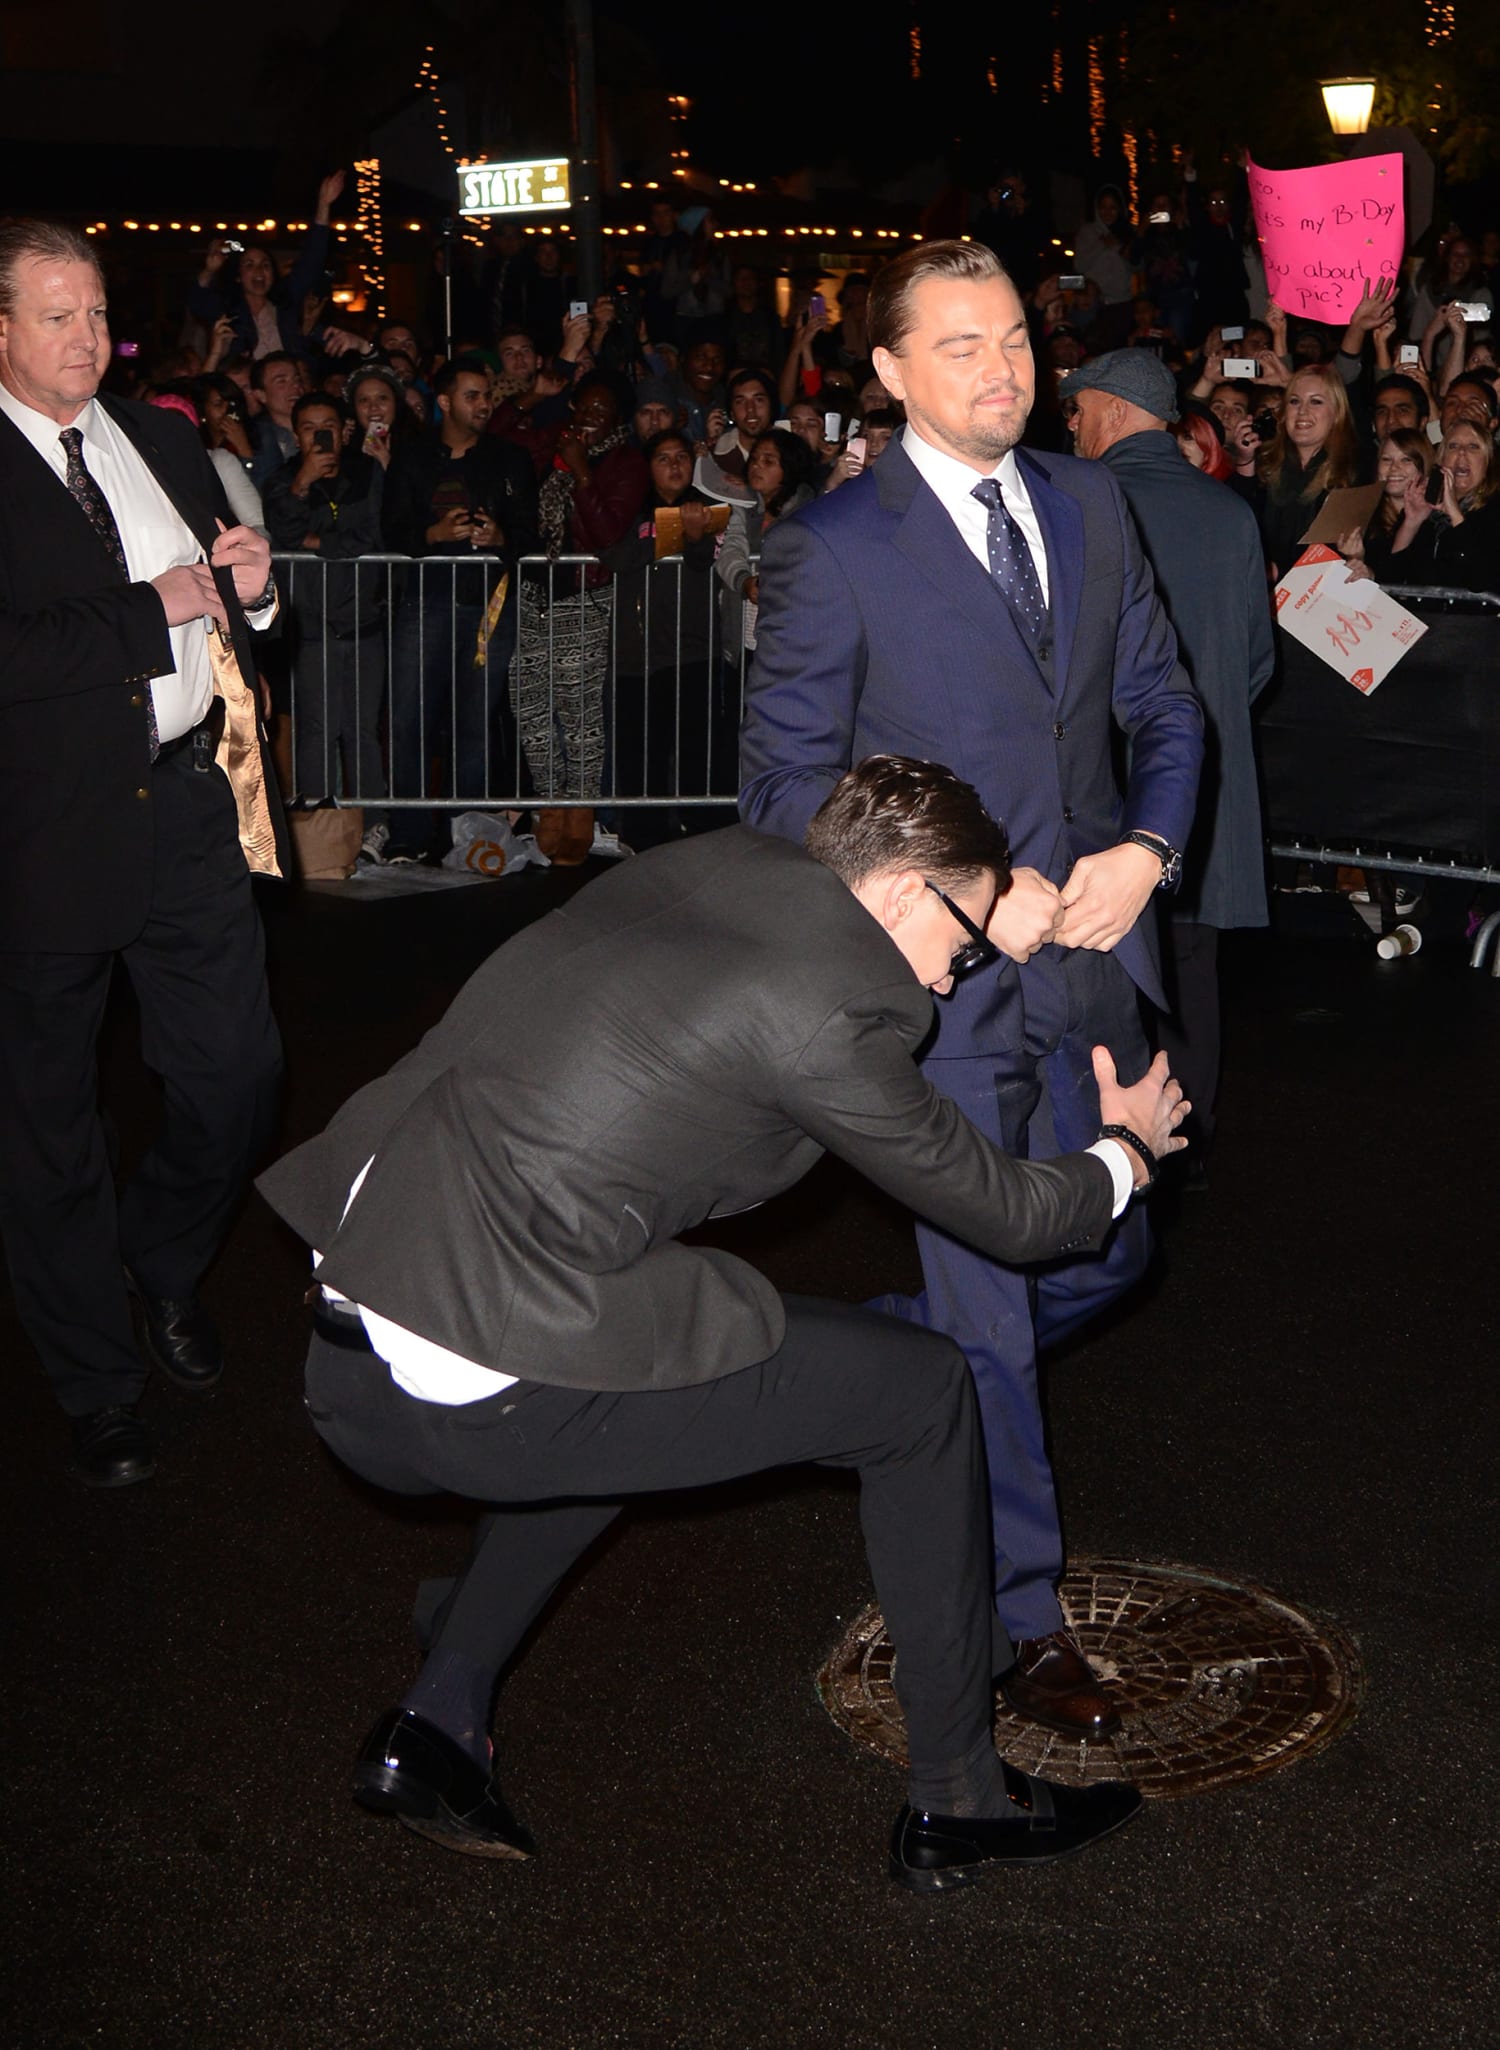 Justin Timberlake is TACKLED by a man who grabs his leg after he arrived to Louis  Vuitton show